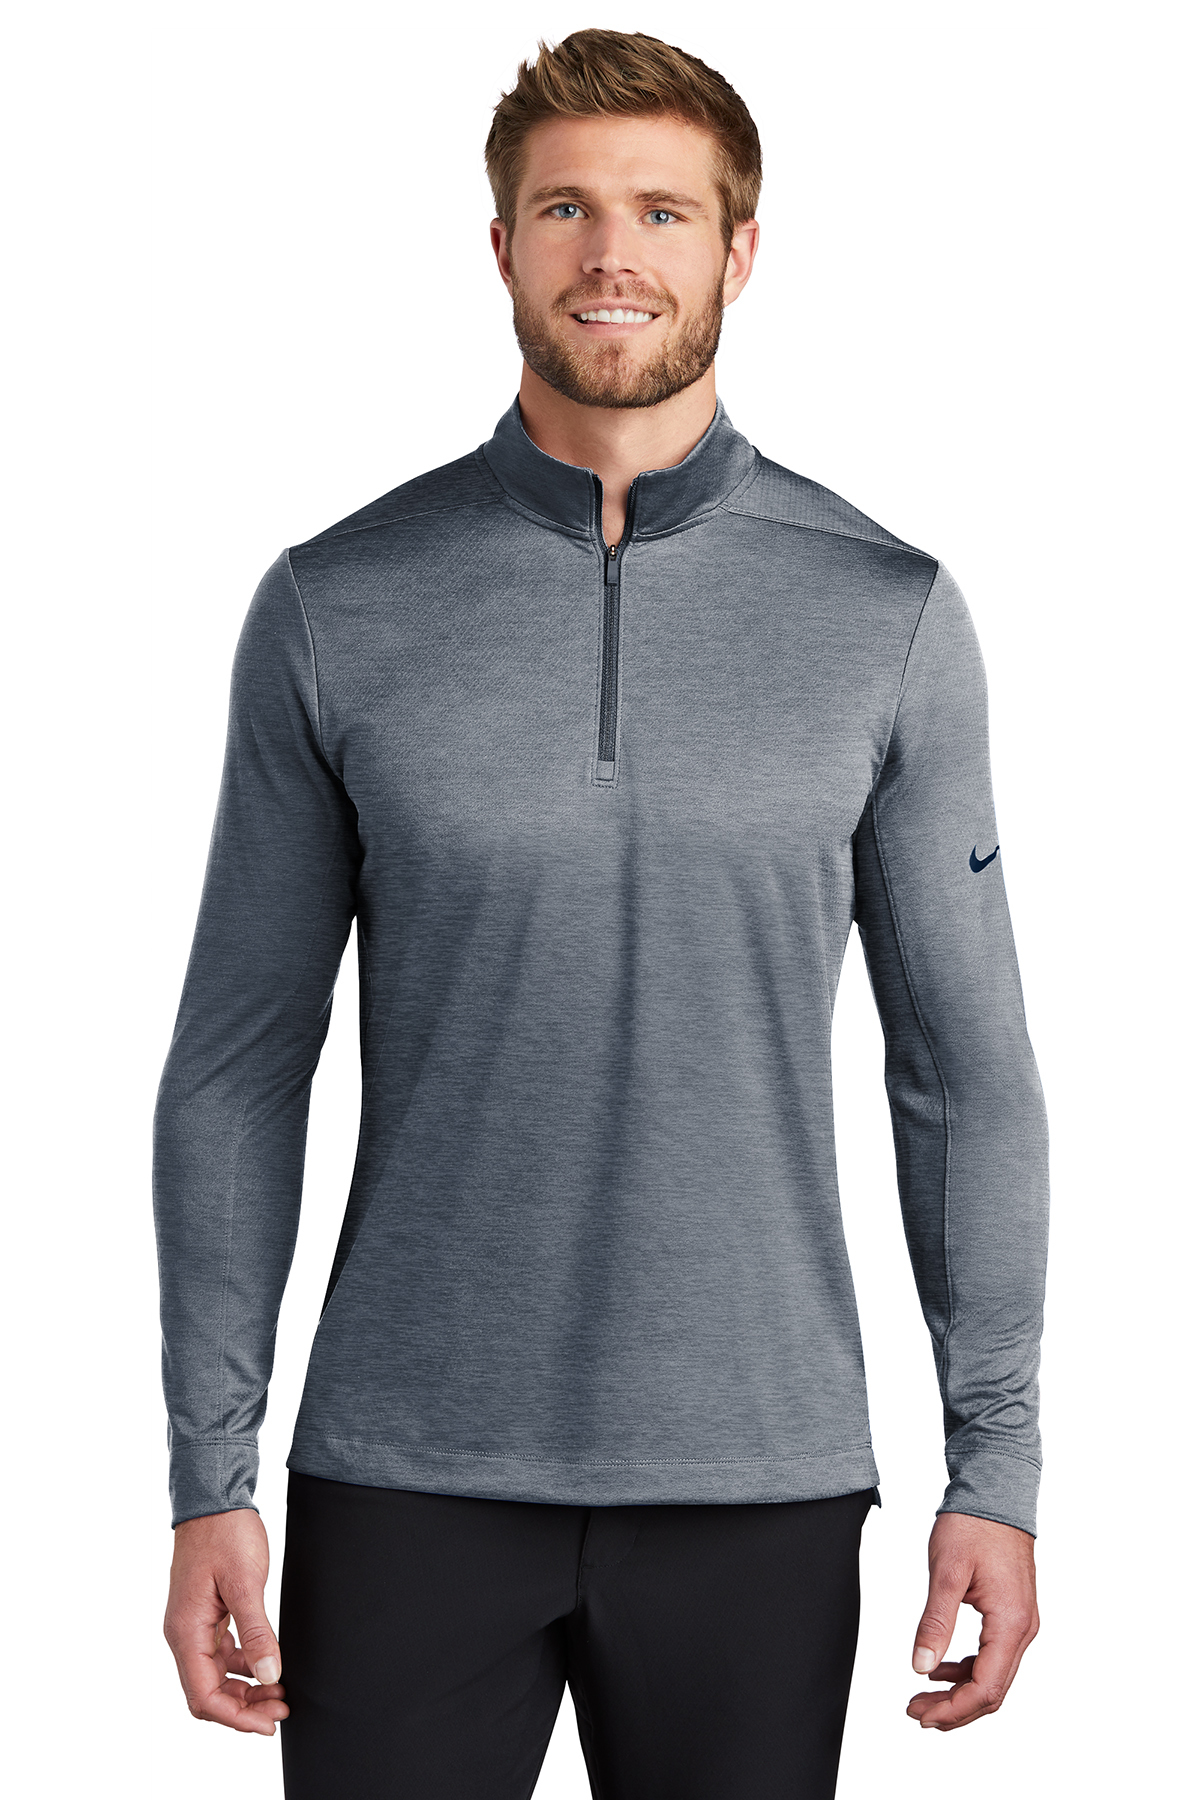 Nike Dry 1/2-Zip | | SanMar Product Cover-Up